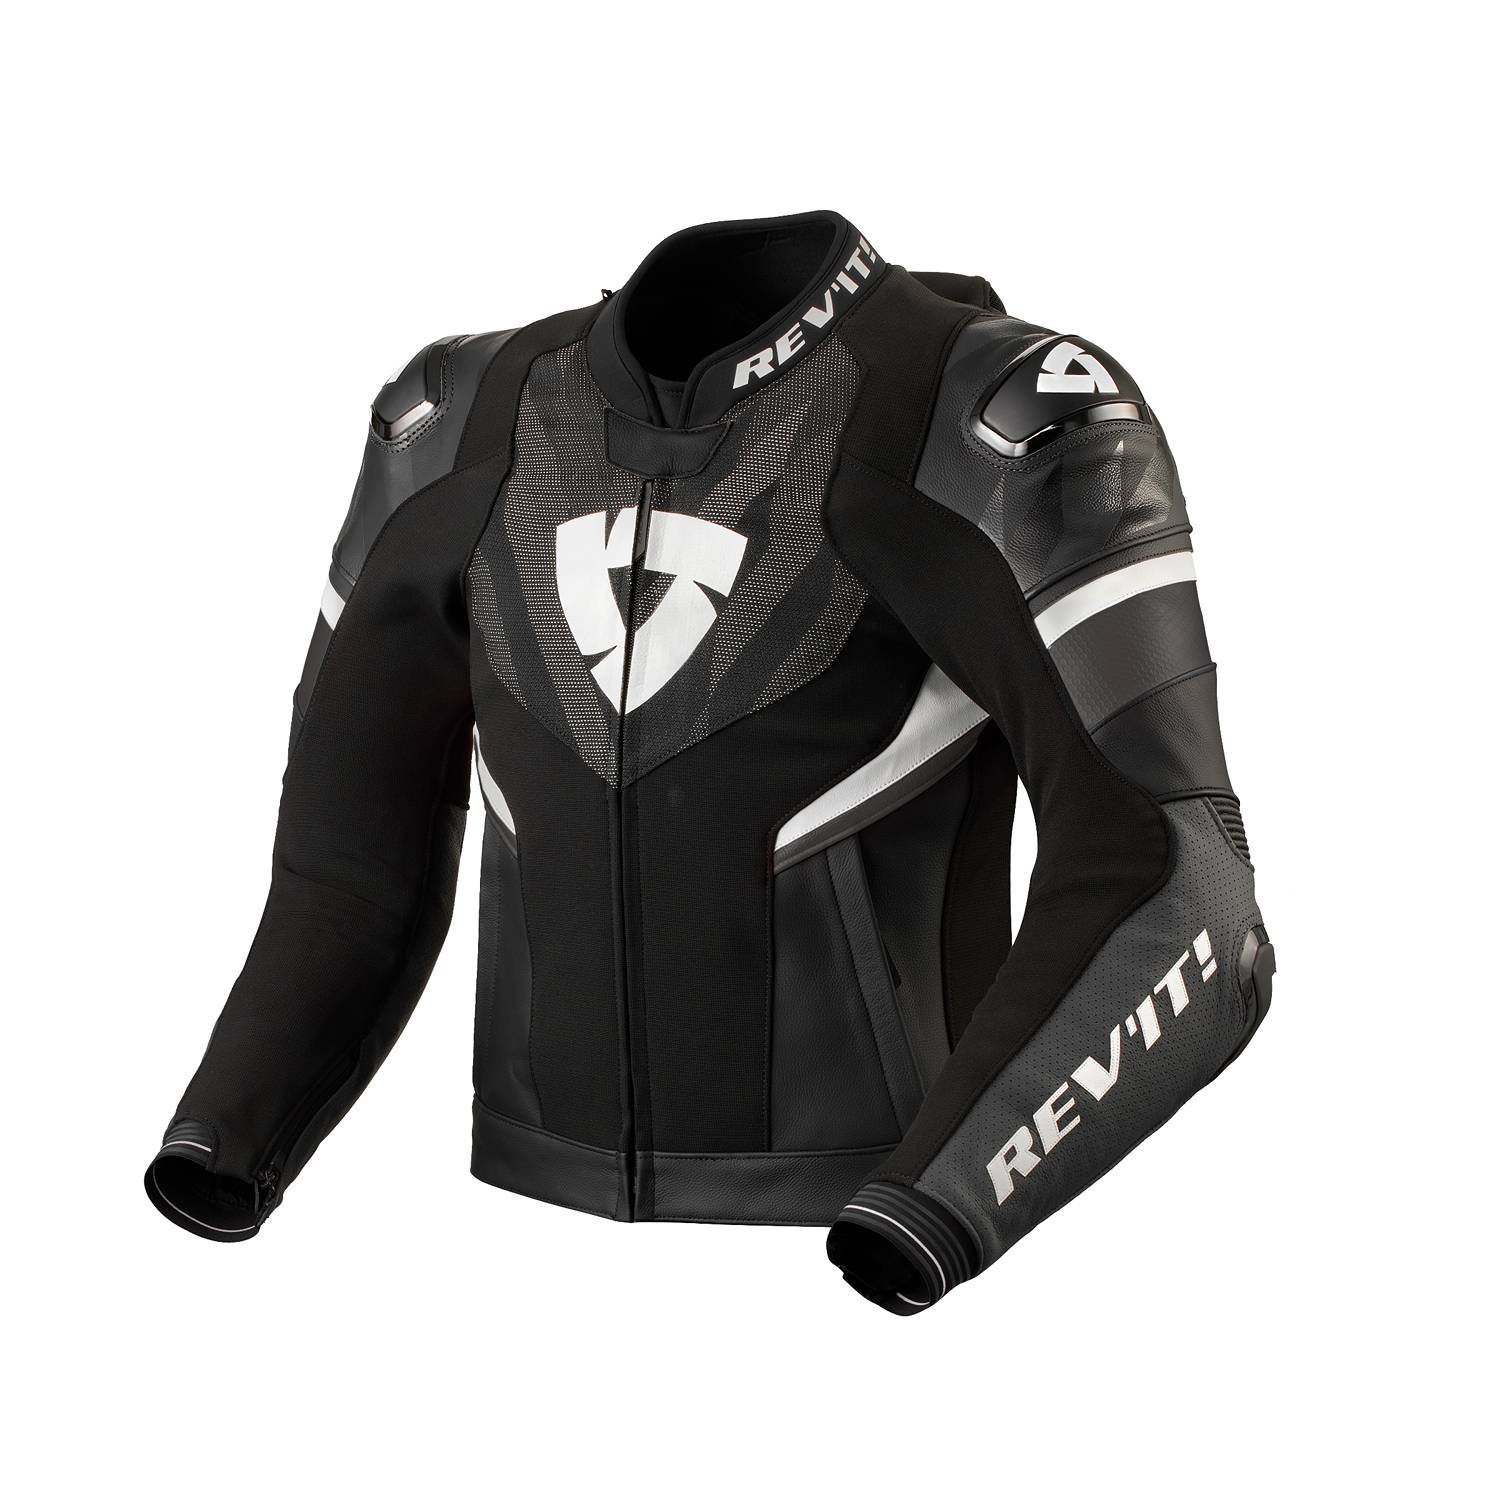 Image of REV'IT! Hyperspeed 2 Pro Jacket Black Anthracite Size 50 ID 8700001358606